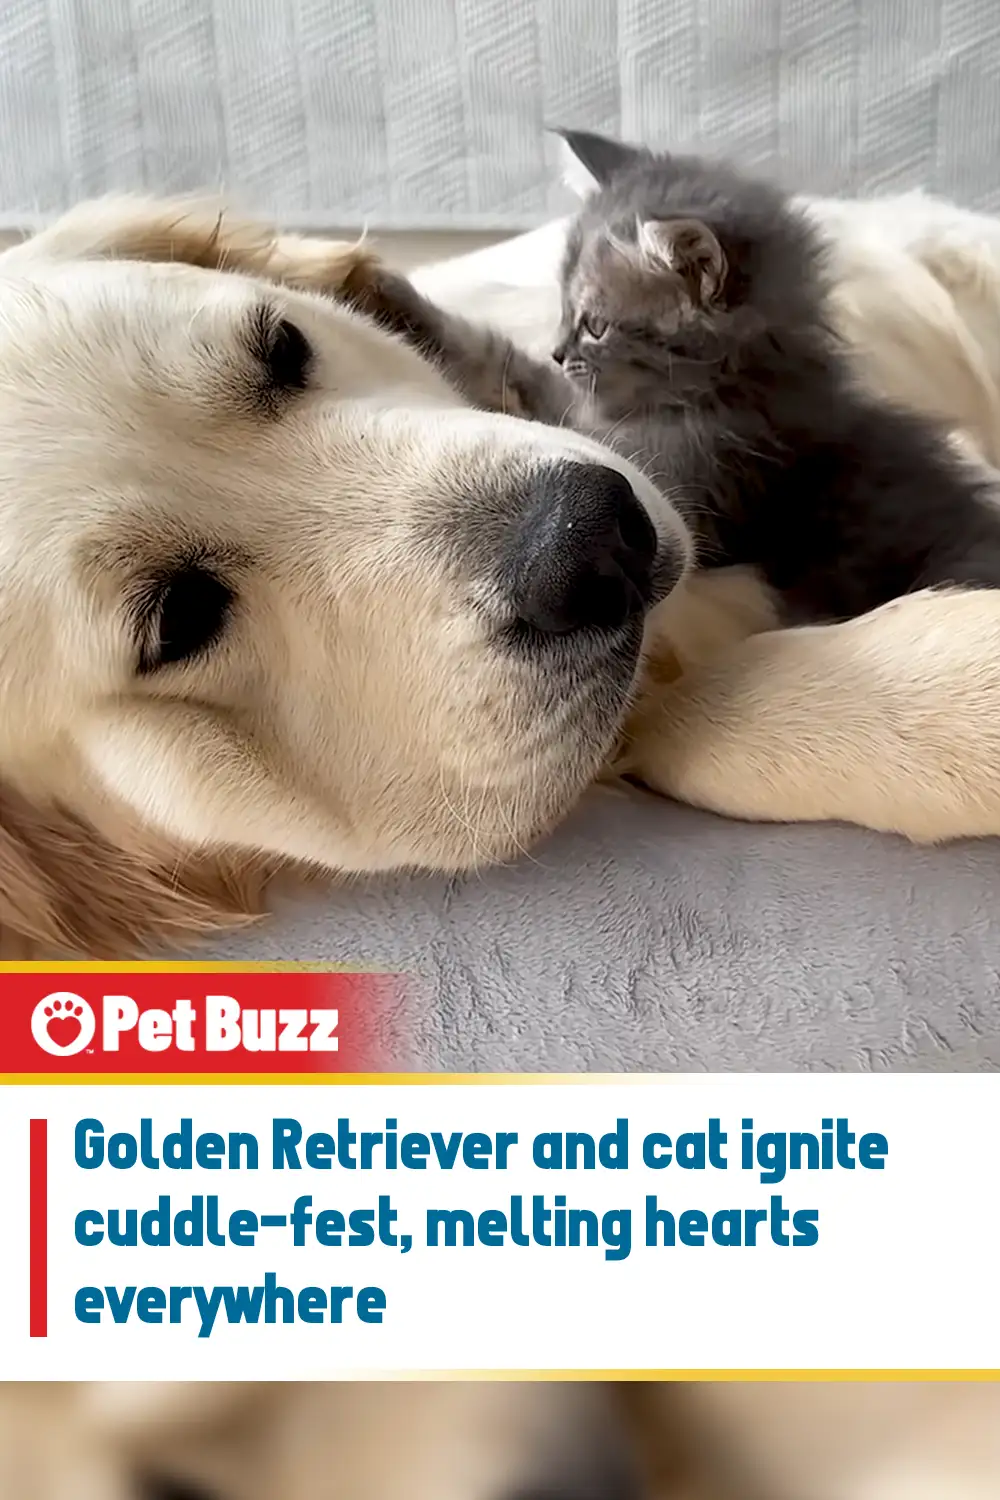 Golden Retriever and cat ignite cuddle-fest, melting hearts everywhere